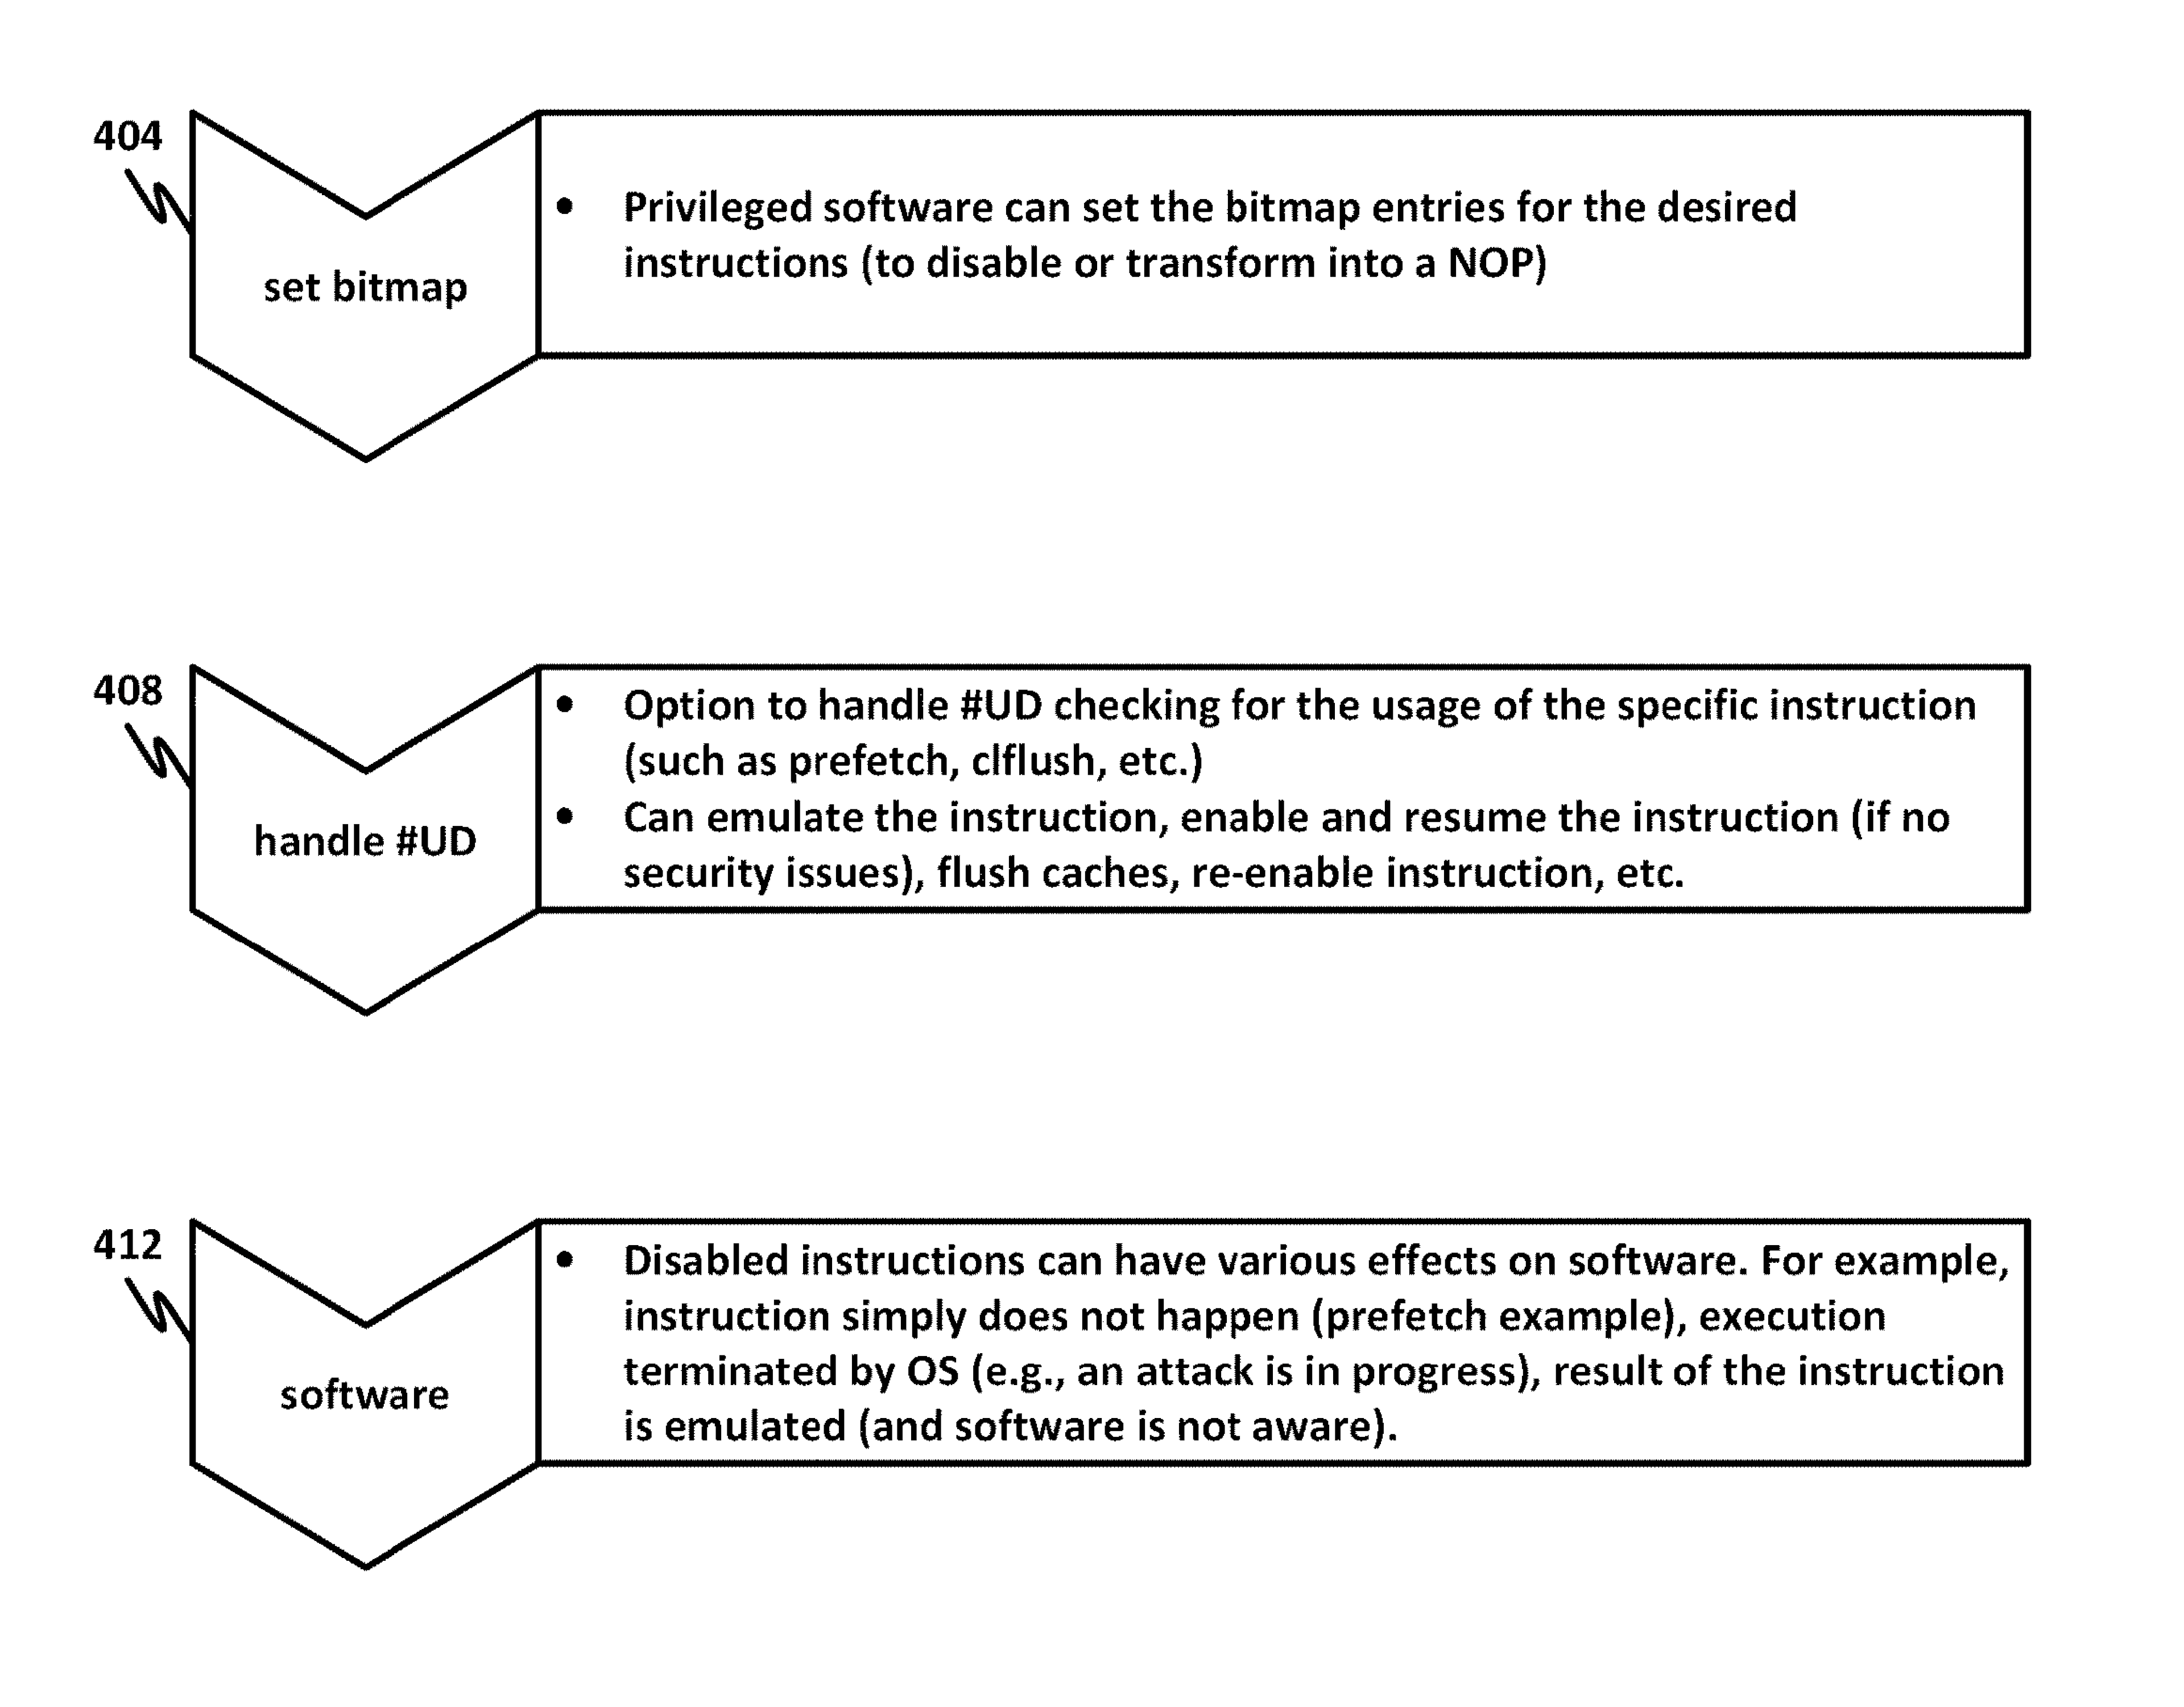 Block diagram illustrating the flow for privileged software to set bitmaps for enabling or disabling instructions.